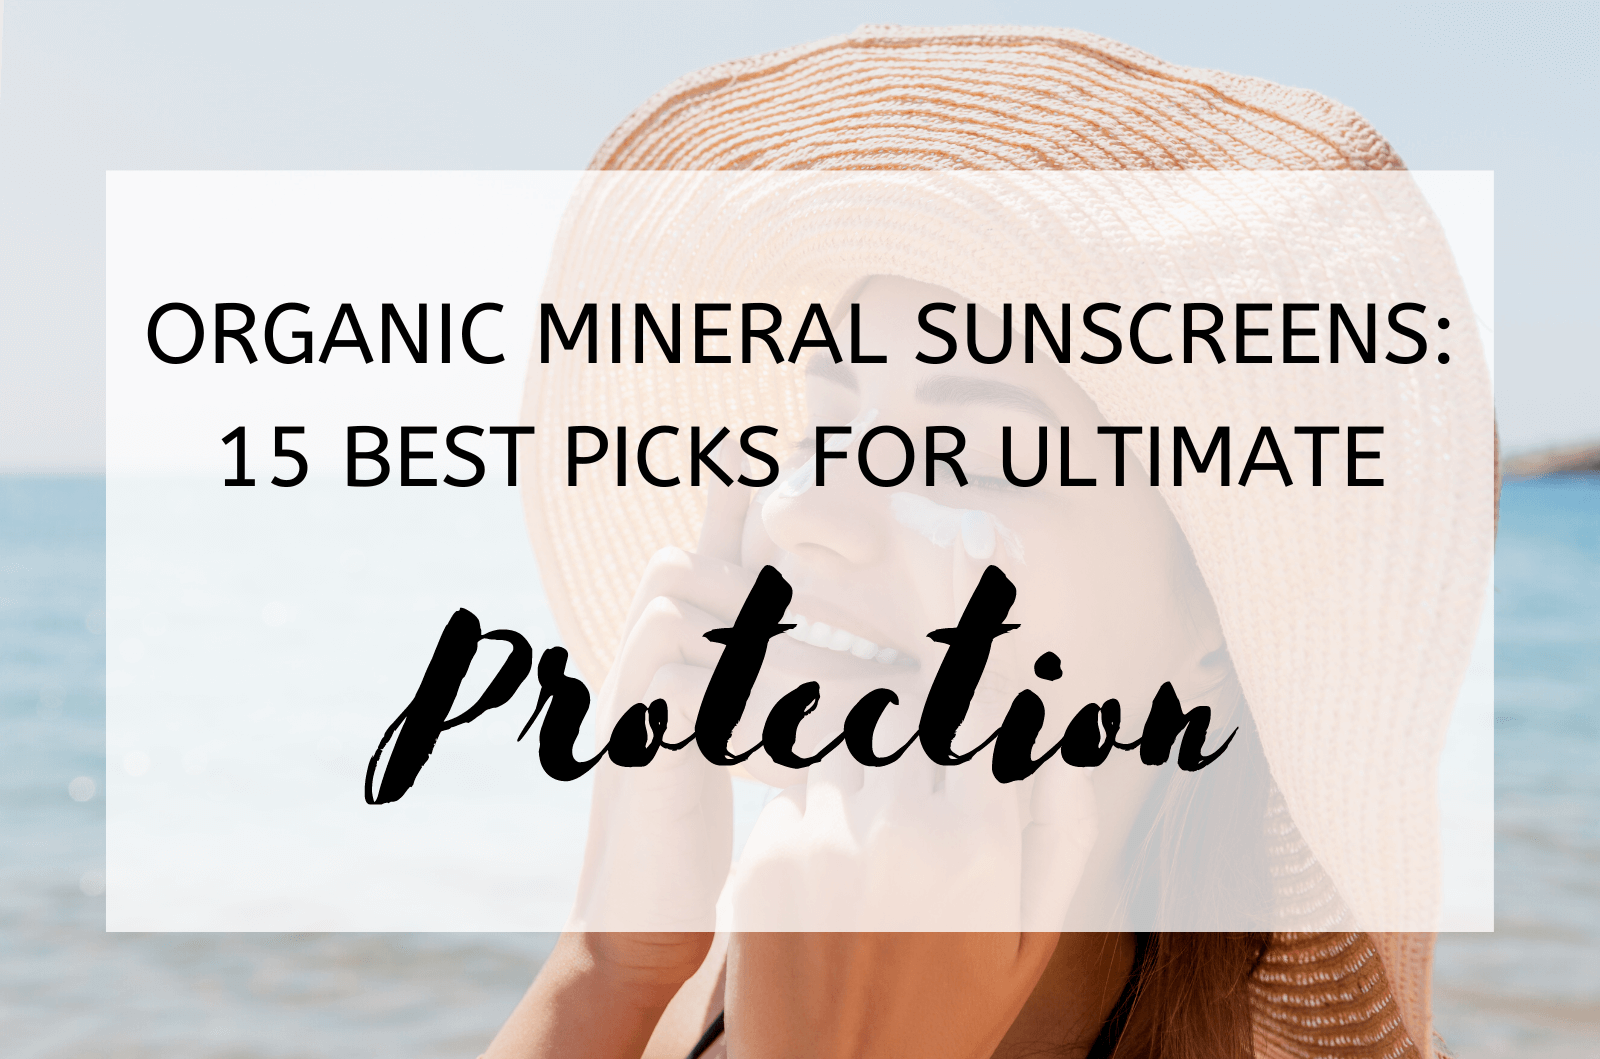 Organic Mineral Sunscreens: 15 Best Picks For Ultimate Protection